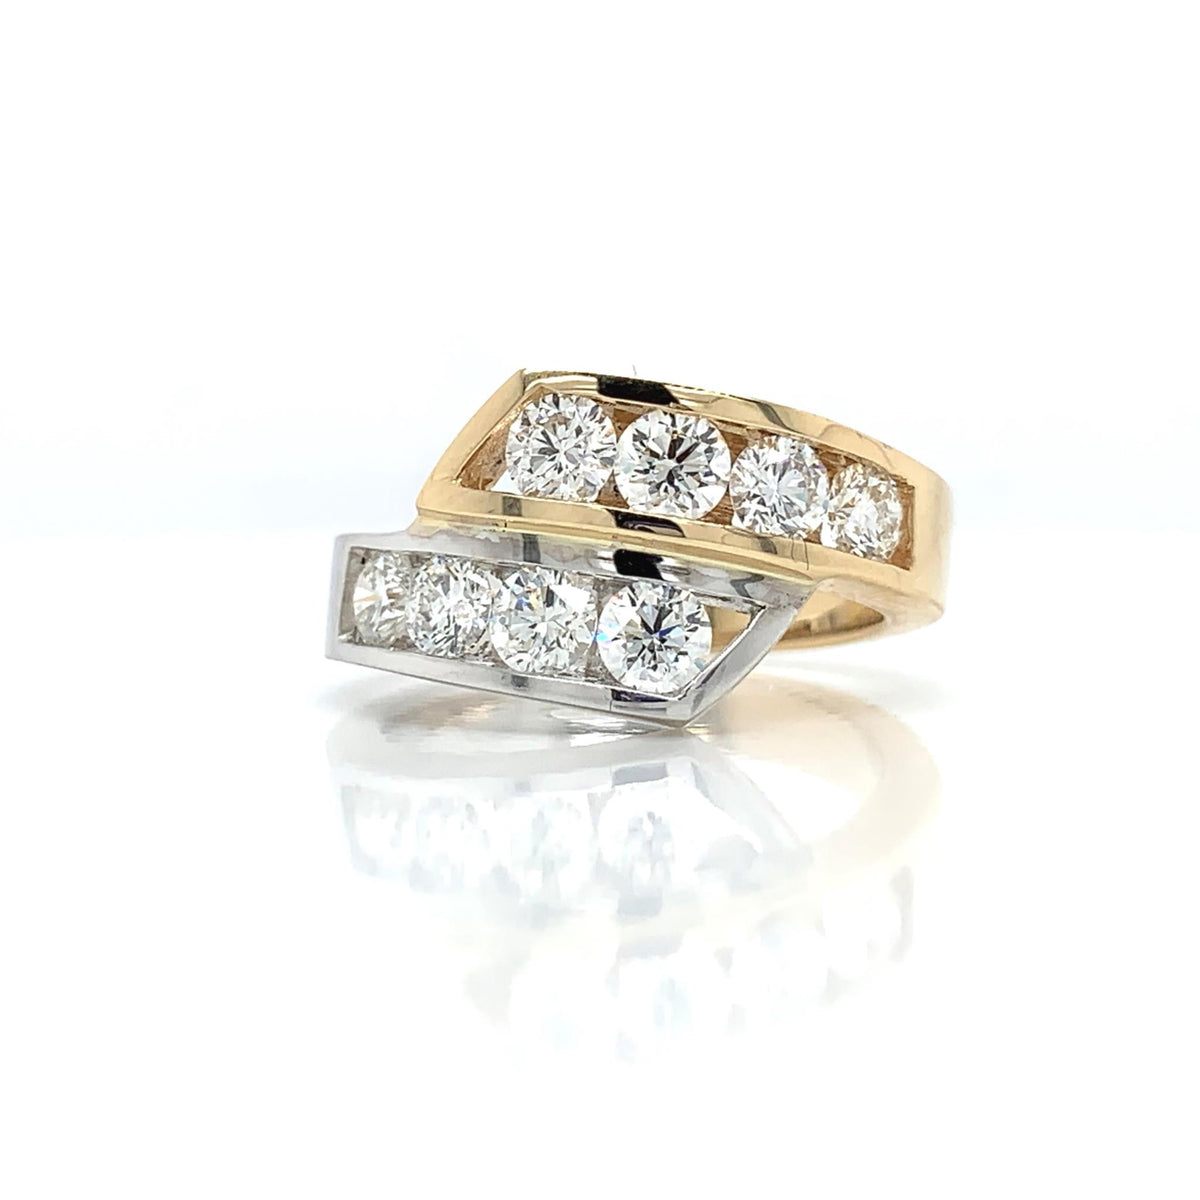 14Kt Yellow & White Gold Bypass Channel  Ring With 1.31cttw Natural Diamonds